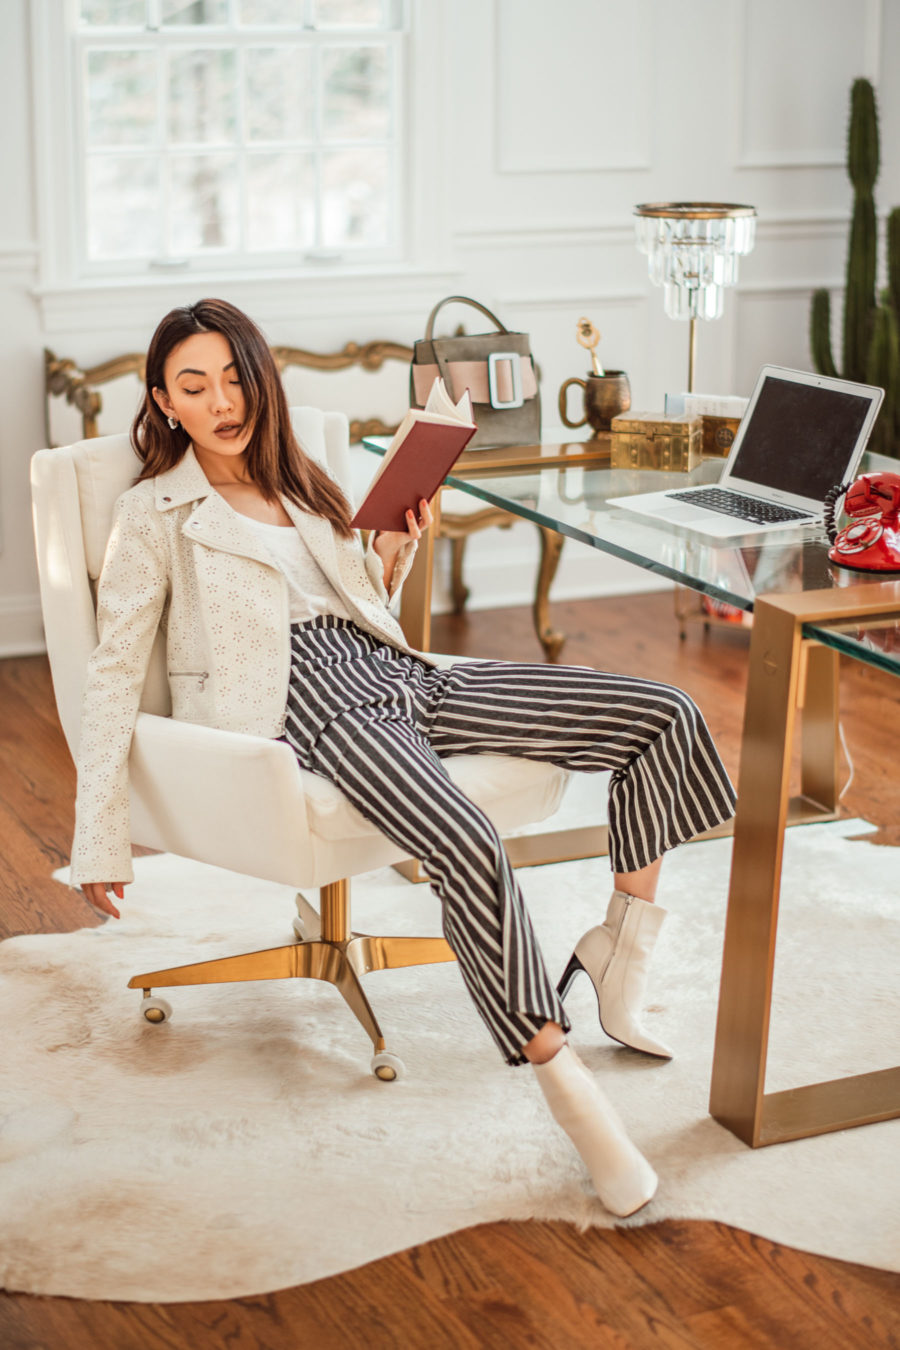 Productivity tools for 2019, office style, chic office outfit // Notjessfashion.com